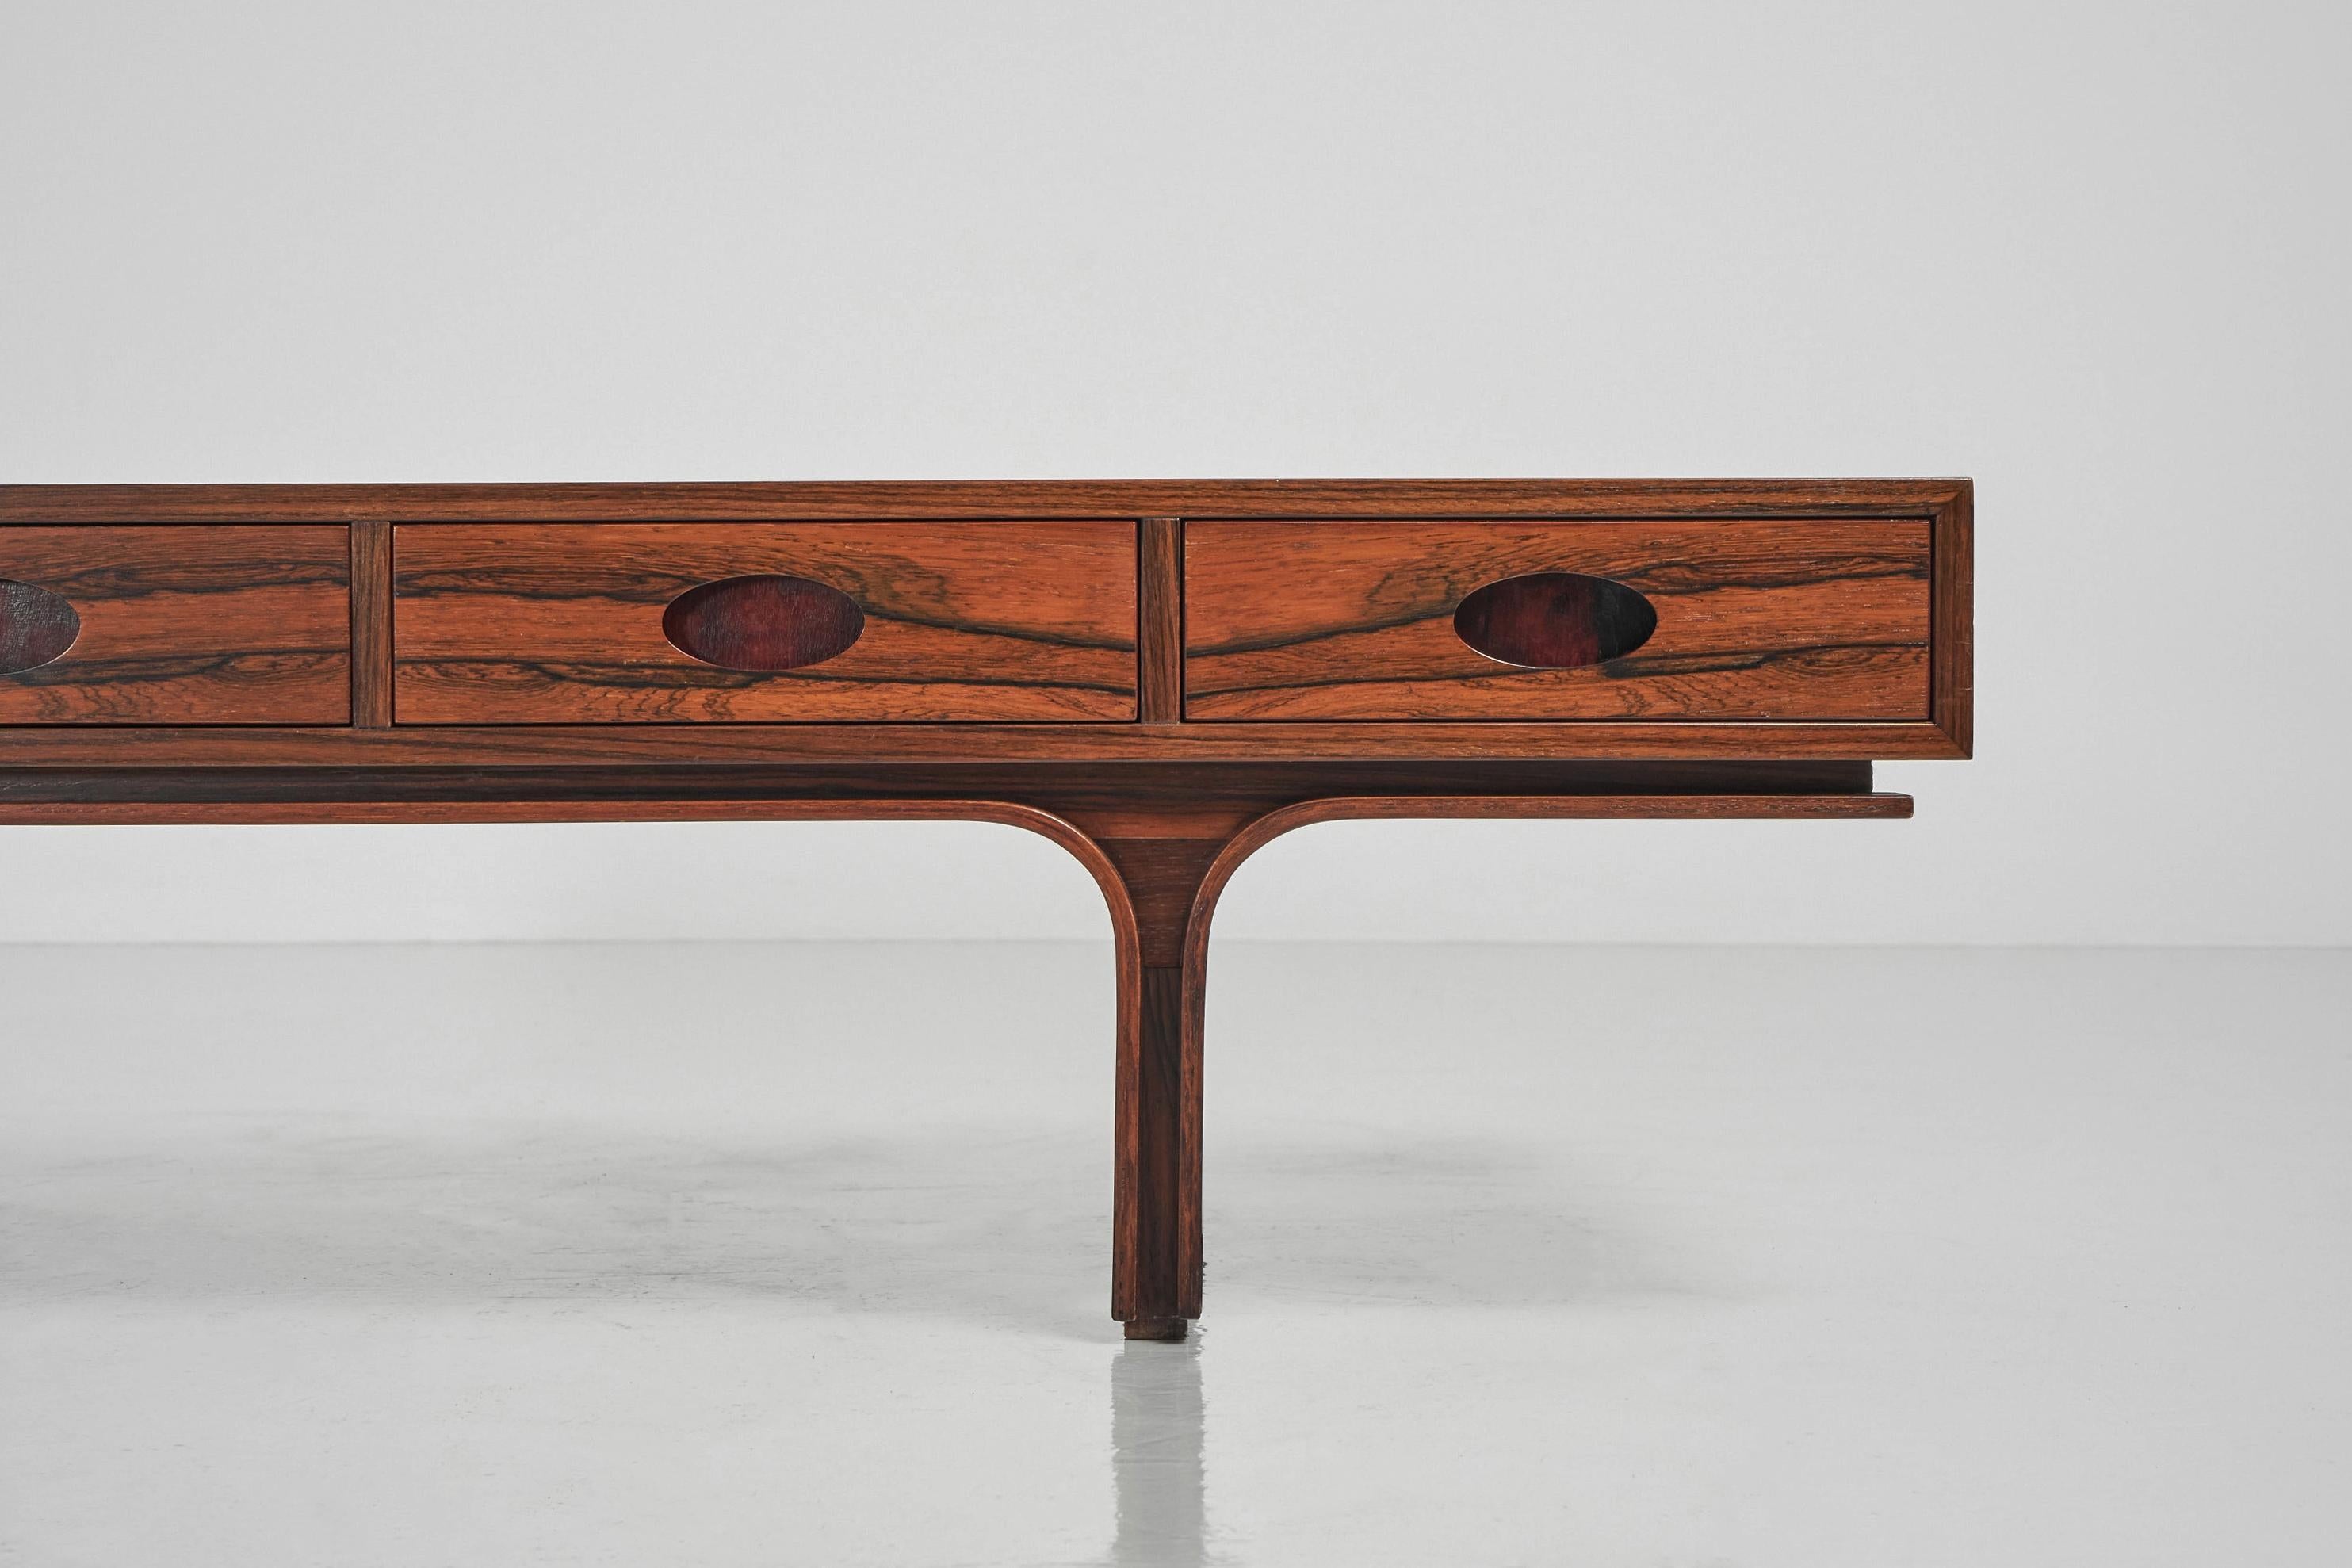 Drawer console table designed by Gianfranco Frattini and manufactured by Bernini, Italy 1957. This stunning quality low console or side table is a unique piece in its genre. This multifunctional piece can be used for different purposes, since it is